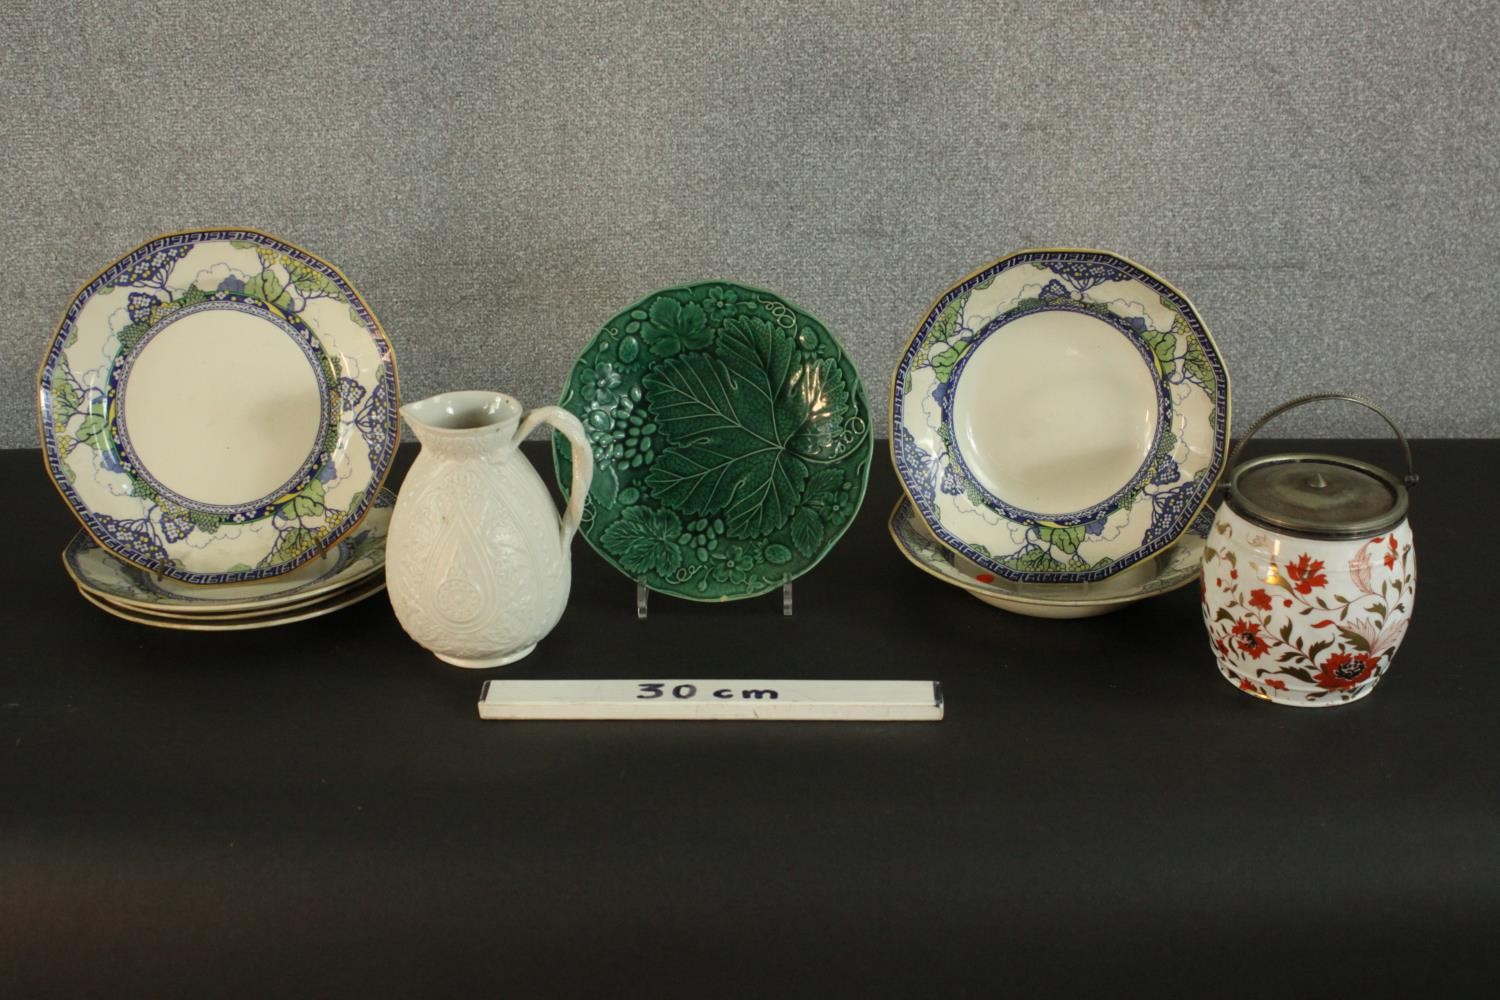 A collection of Royal Doulton Merryweather plates and bowls, along with a 19th century green glaze - Image 2 of 14